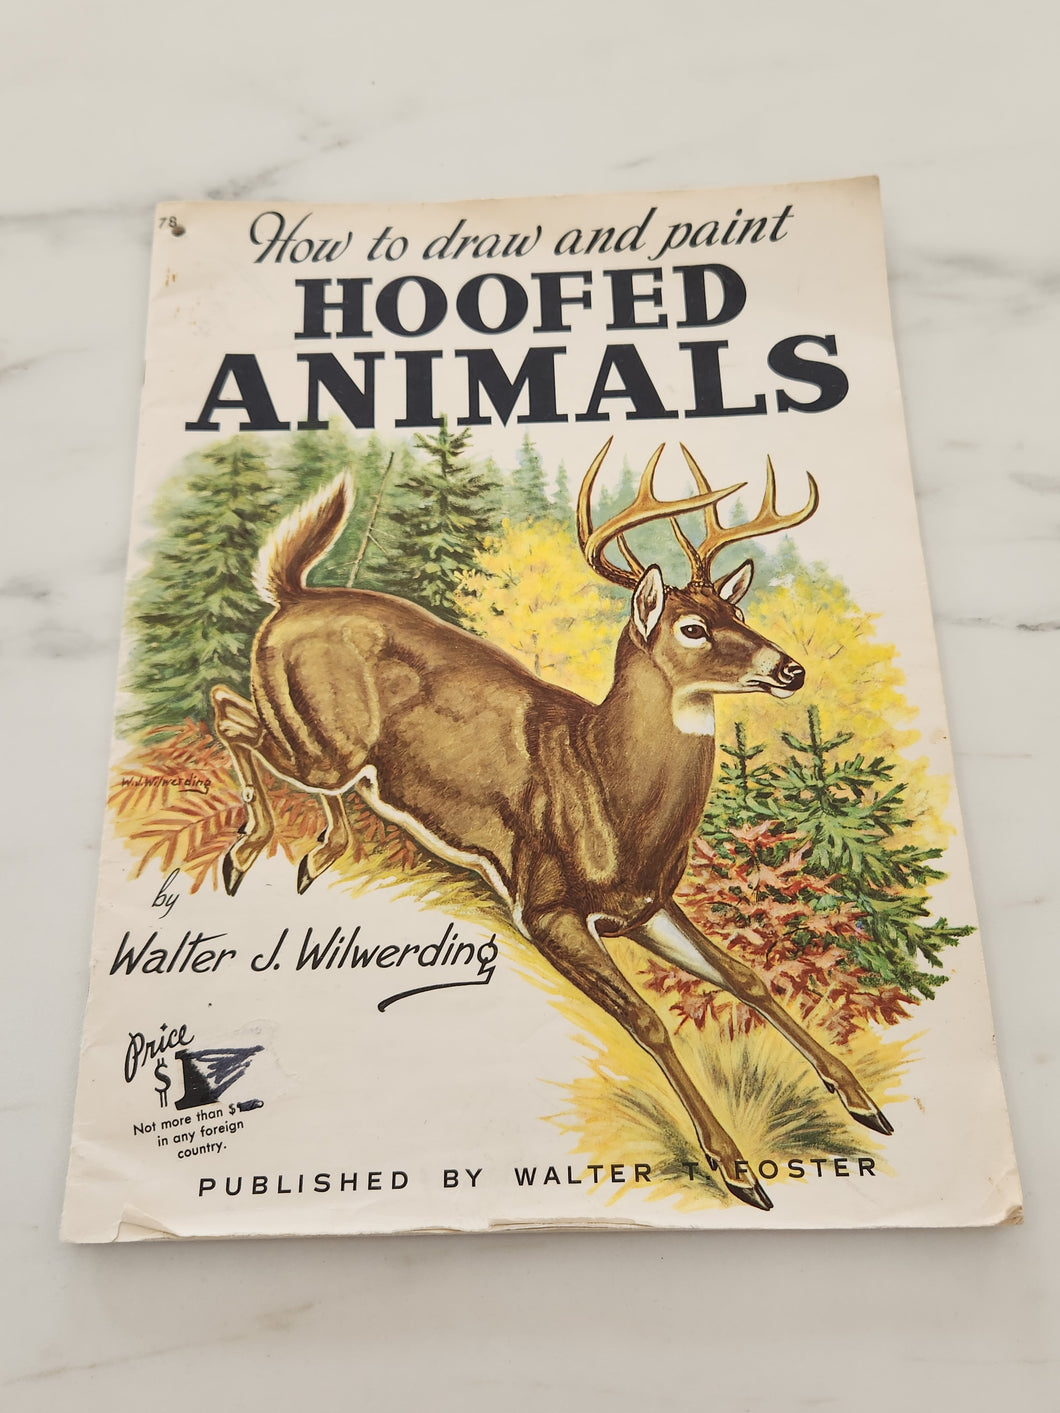 Vintage How to draw and paint hoofed animals book